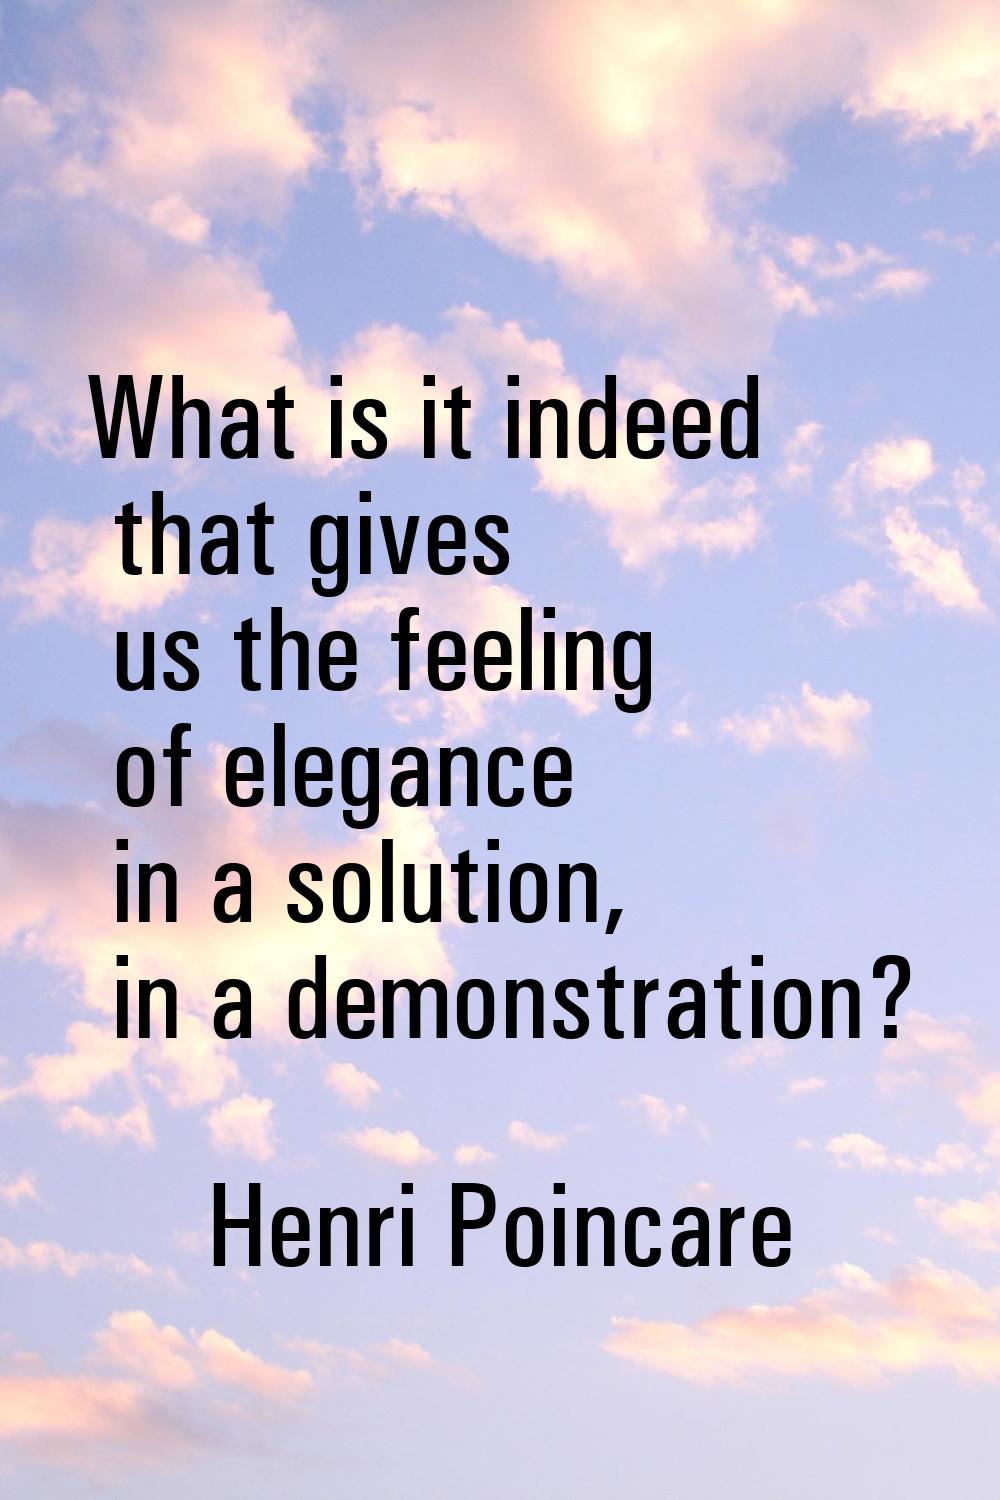 What is it indeed that gives us the feeling of elegance in a solution, in a demonstration?